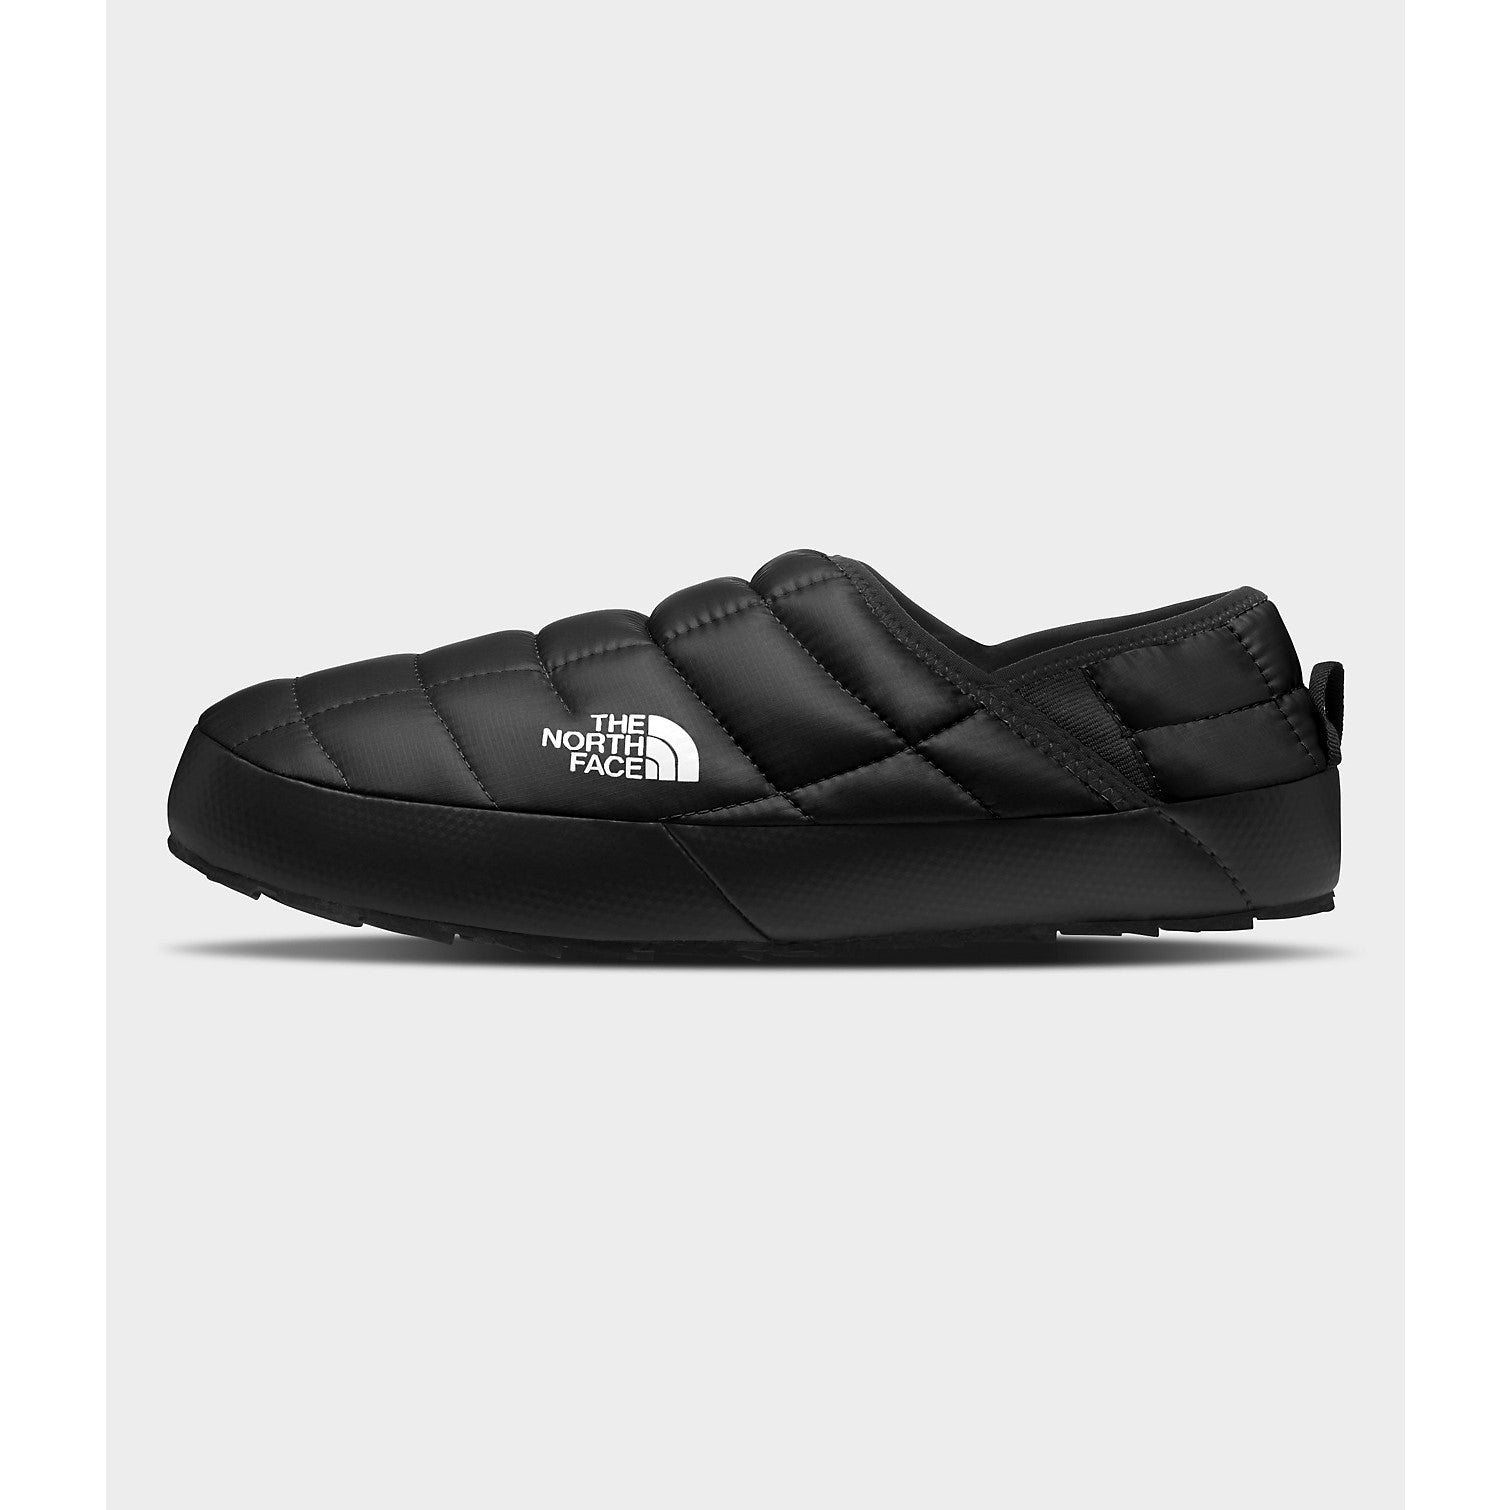 The North Face Men's Thermoball Traction Mule V